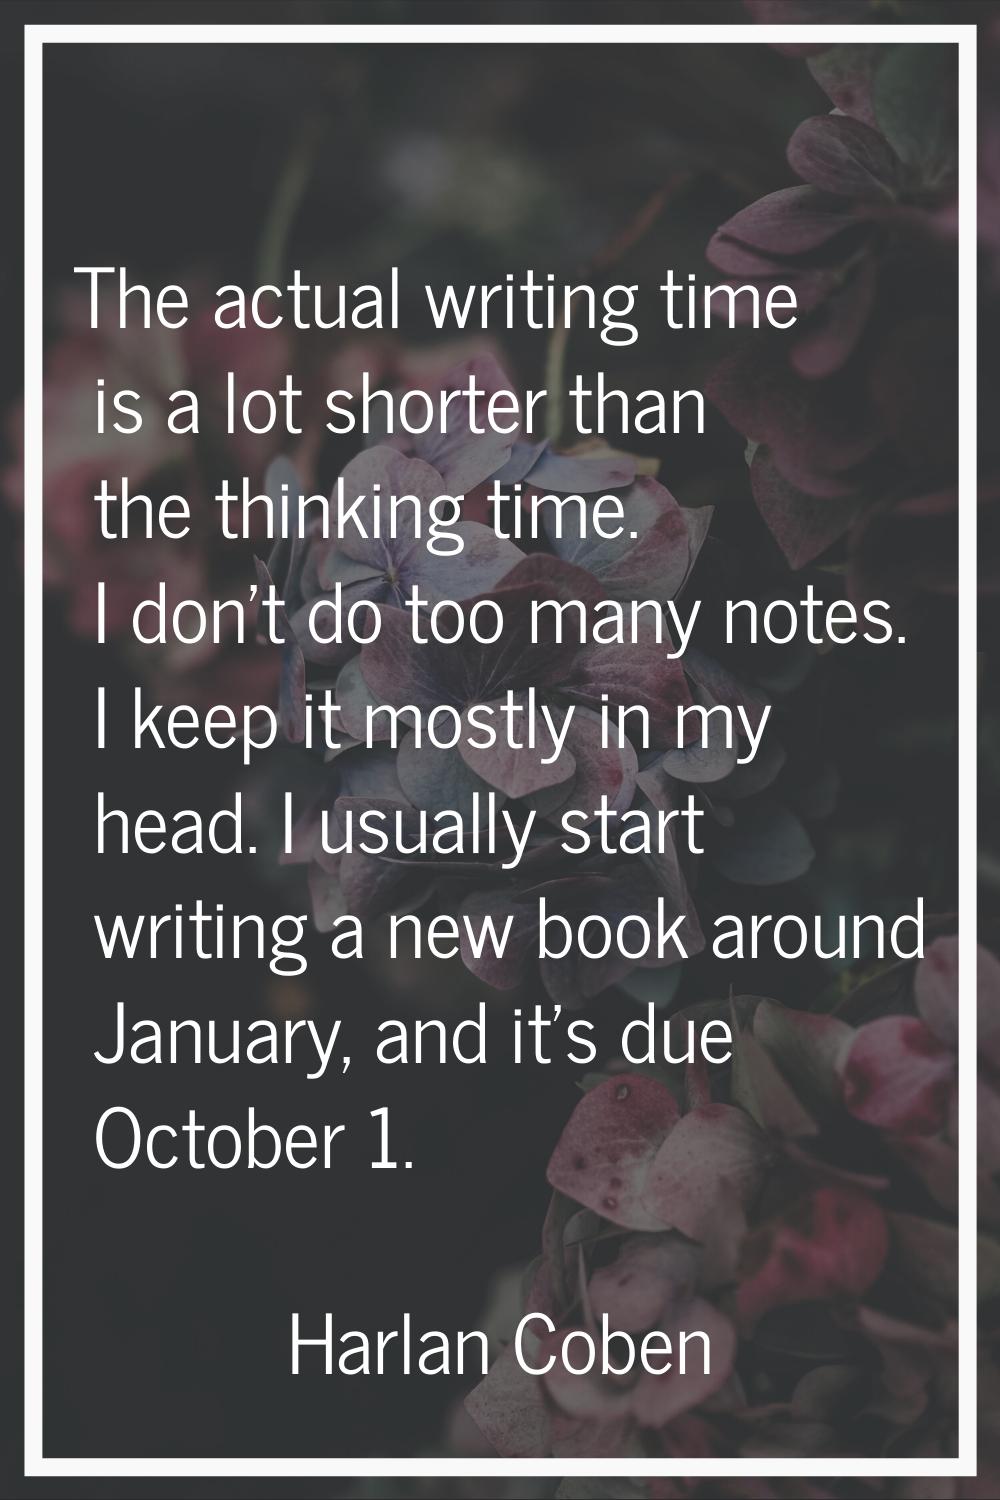 The actual writing time is a lot shorter than the thinking time. I don't do too many notes. I keep 